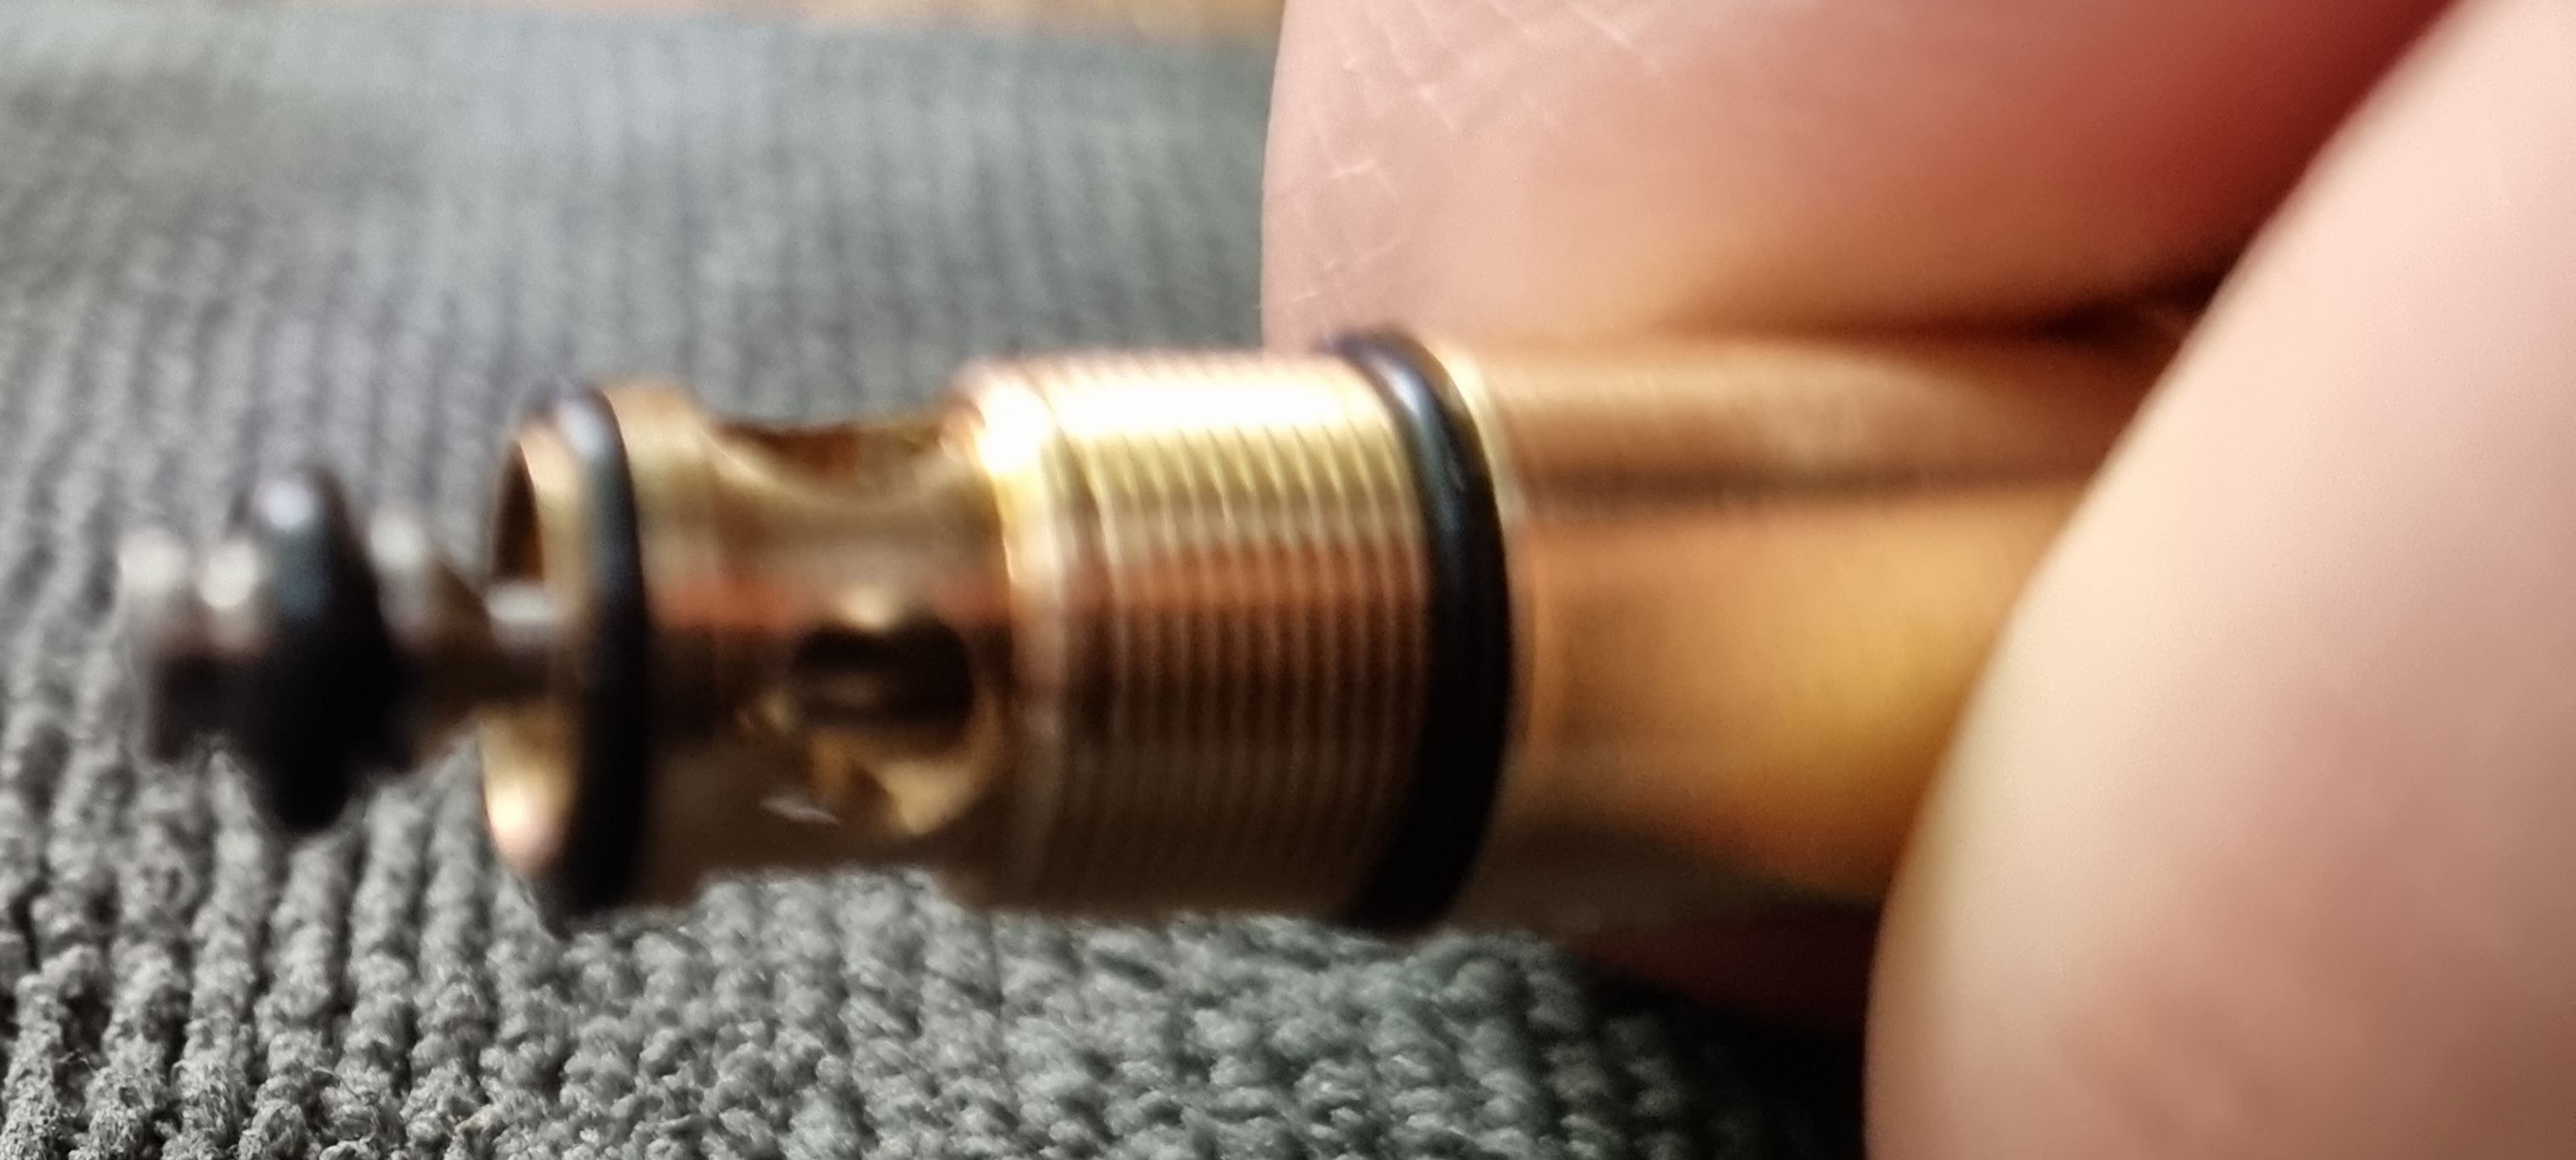 GHK Replacing The Valve Output O-Rings Guide: Push the silver post back through the brass shell